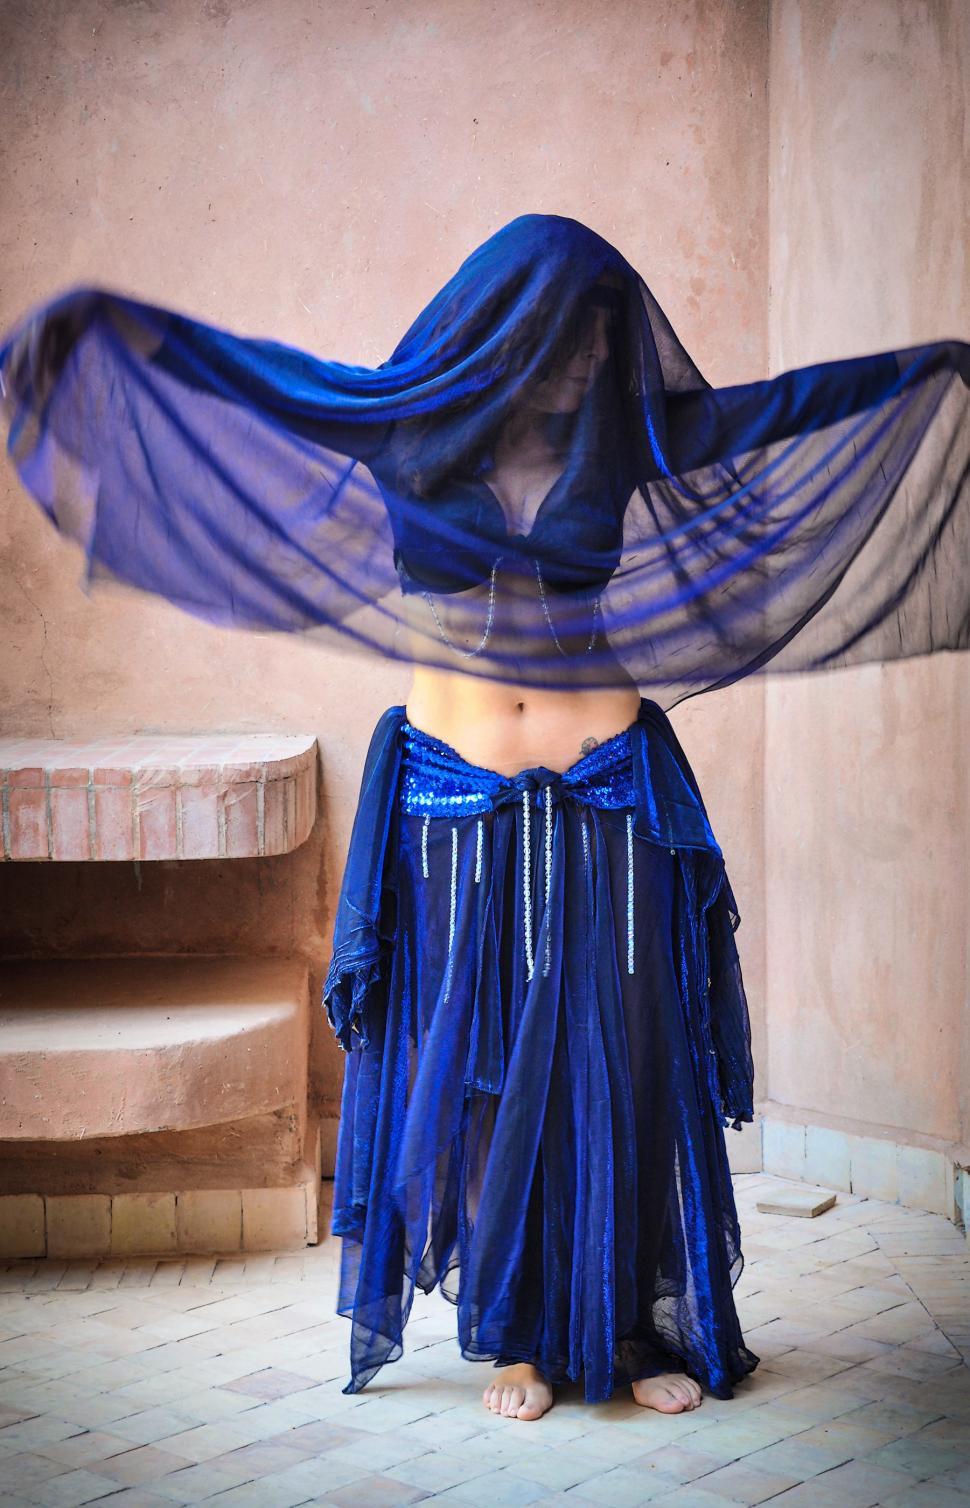 Free Image of Woman belly dancing 